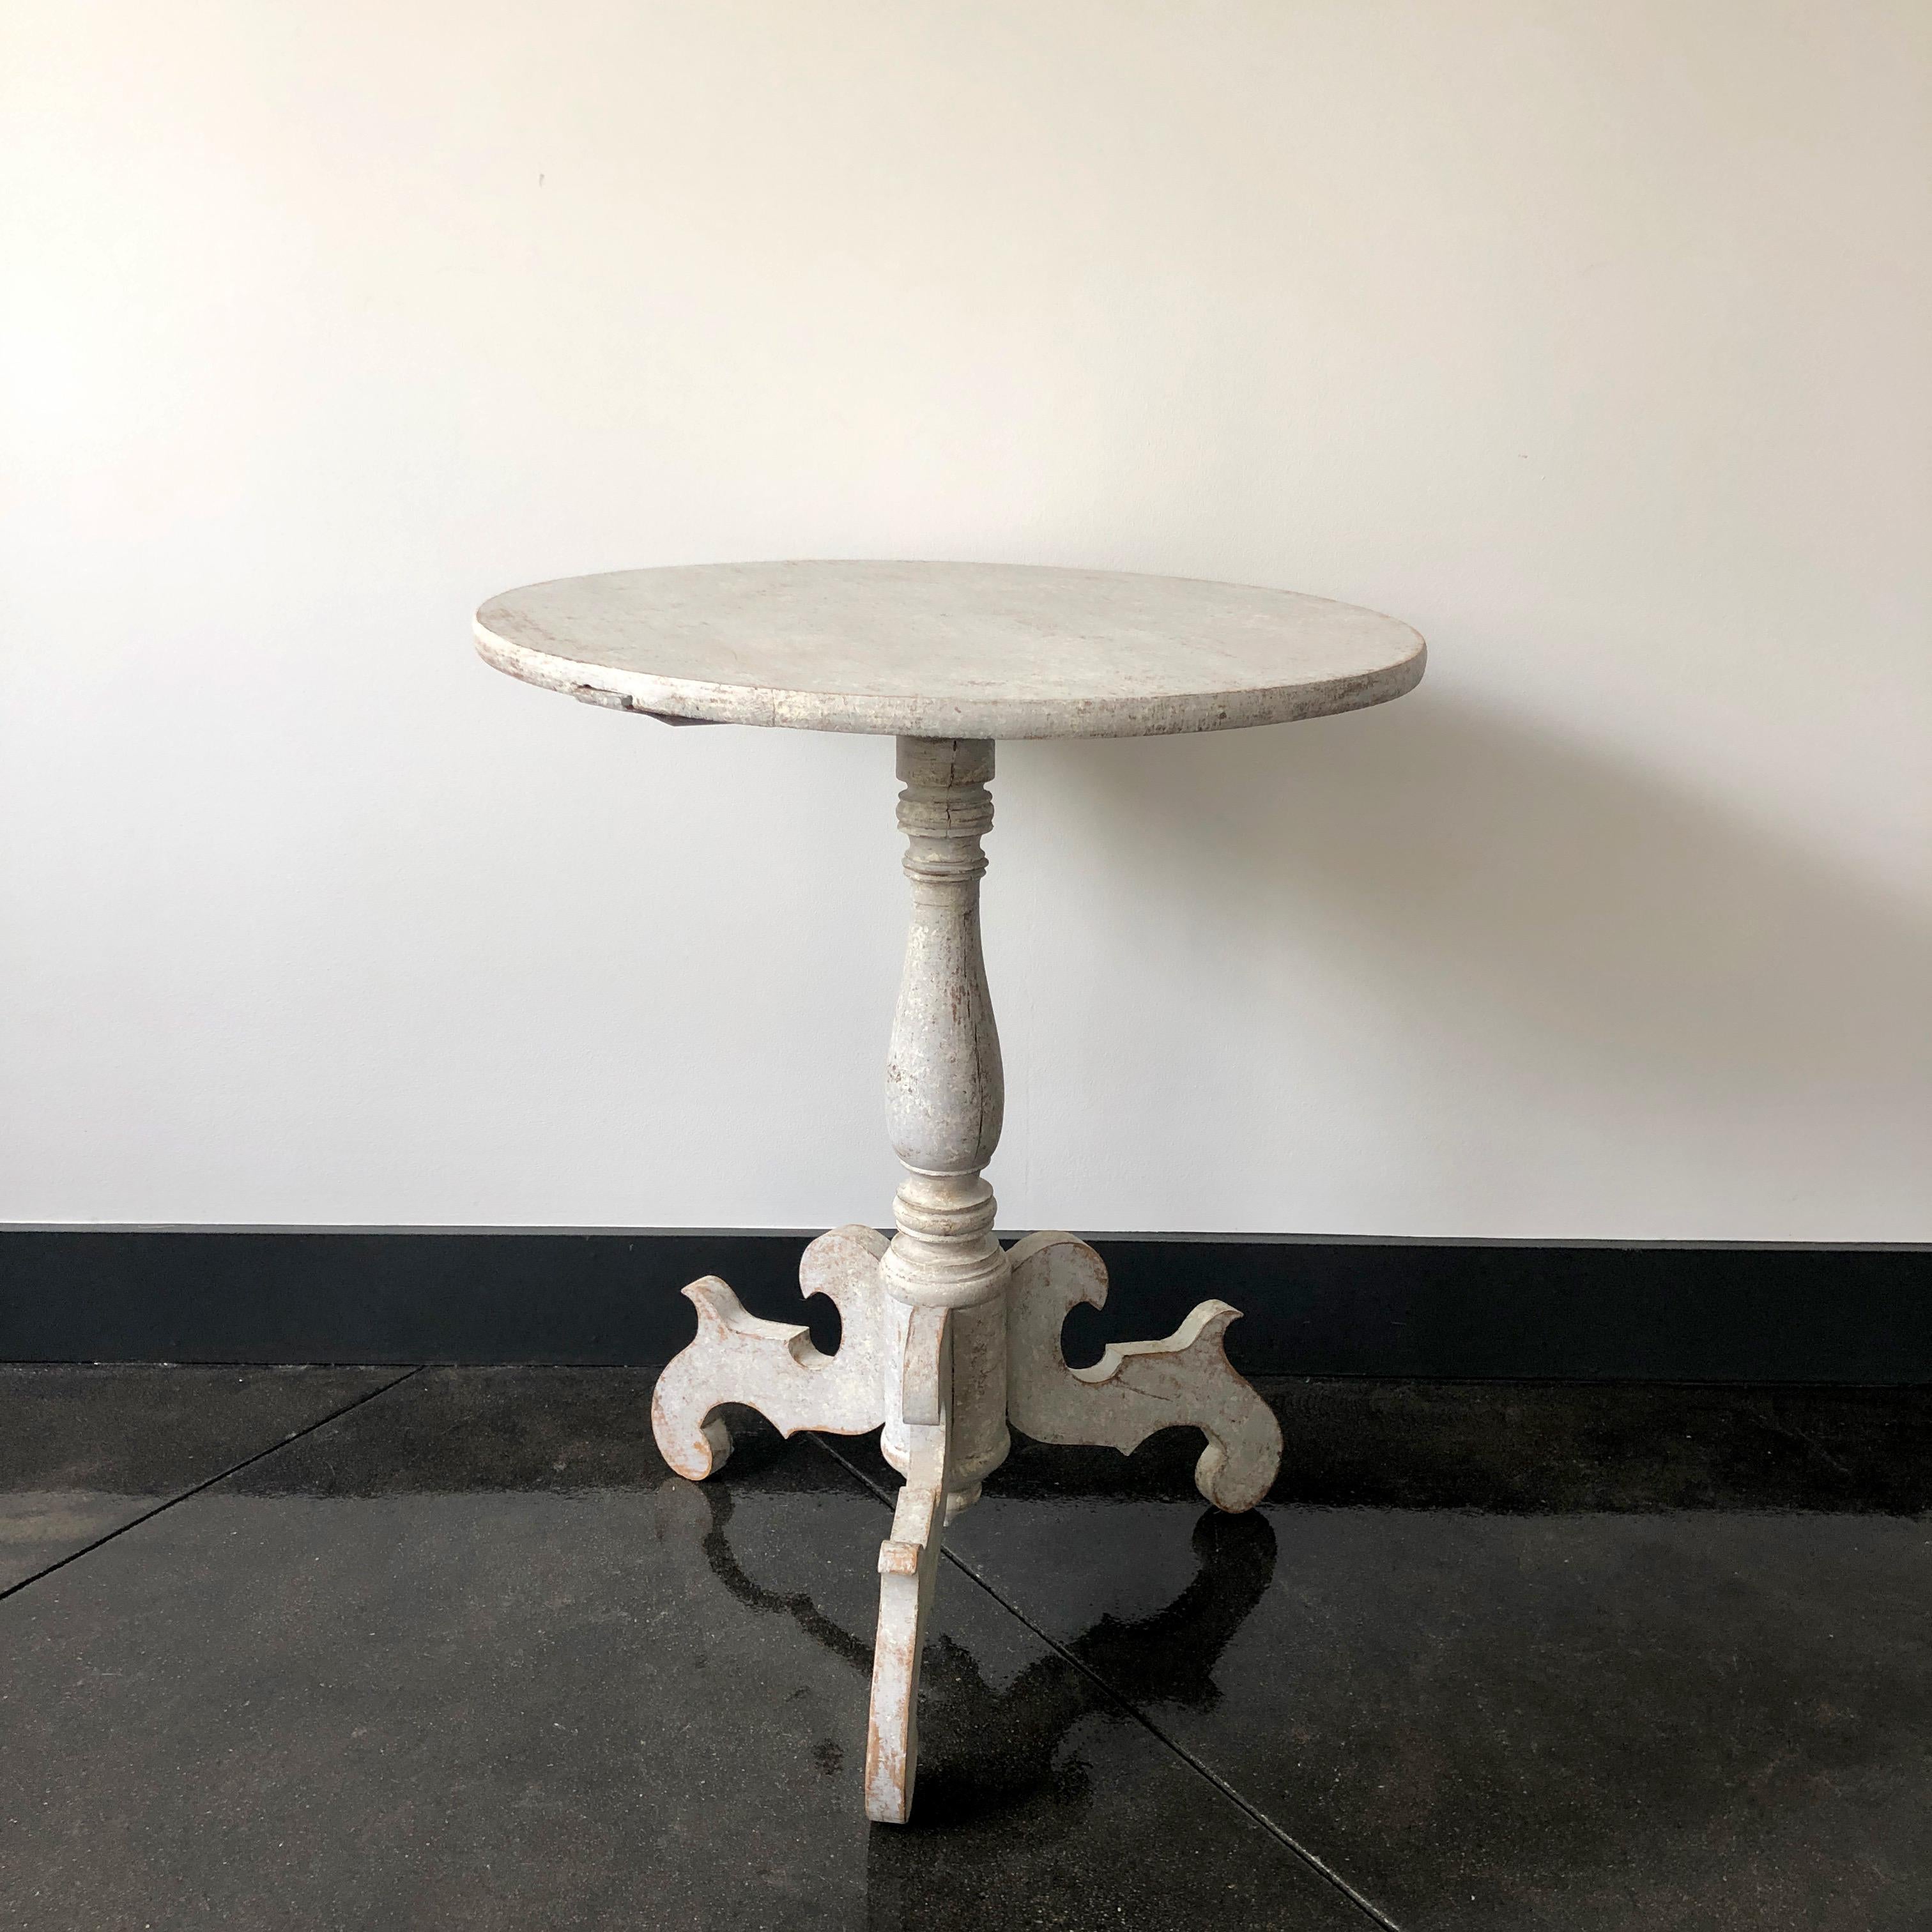 A charming large round pedestal table with turned base supported by beautifully carved legs.
Värmland, Sweden, circa 1840-1850.